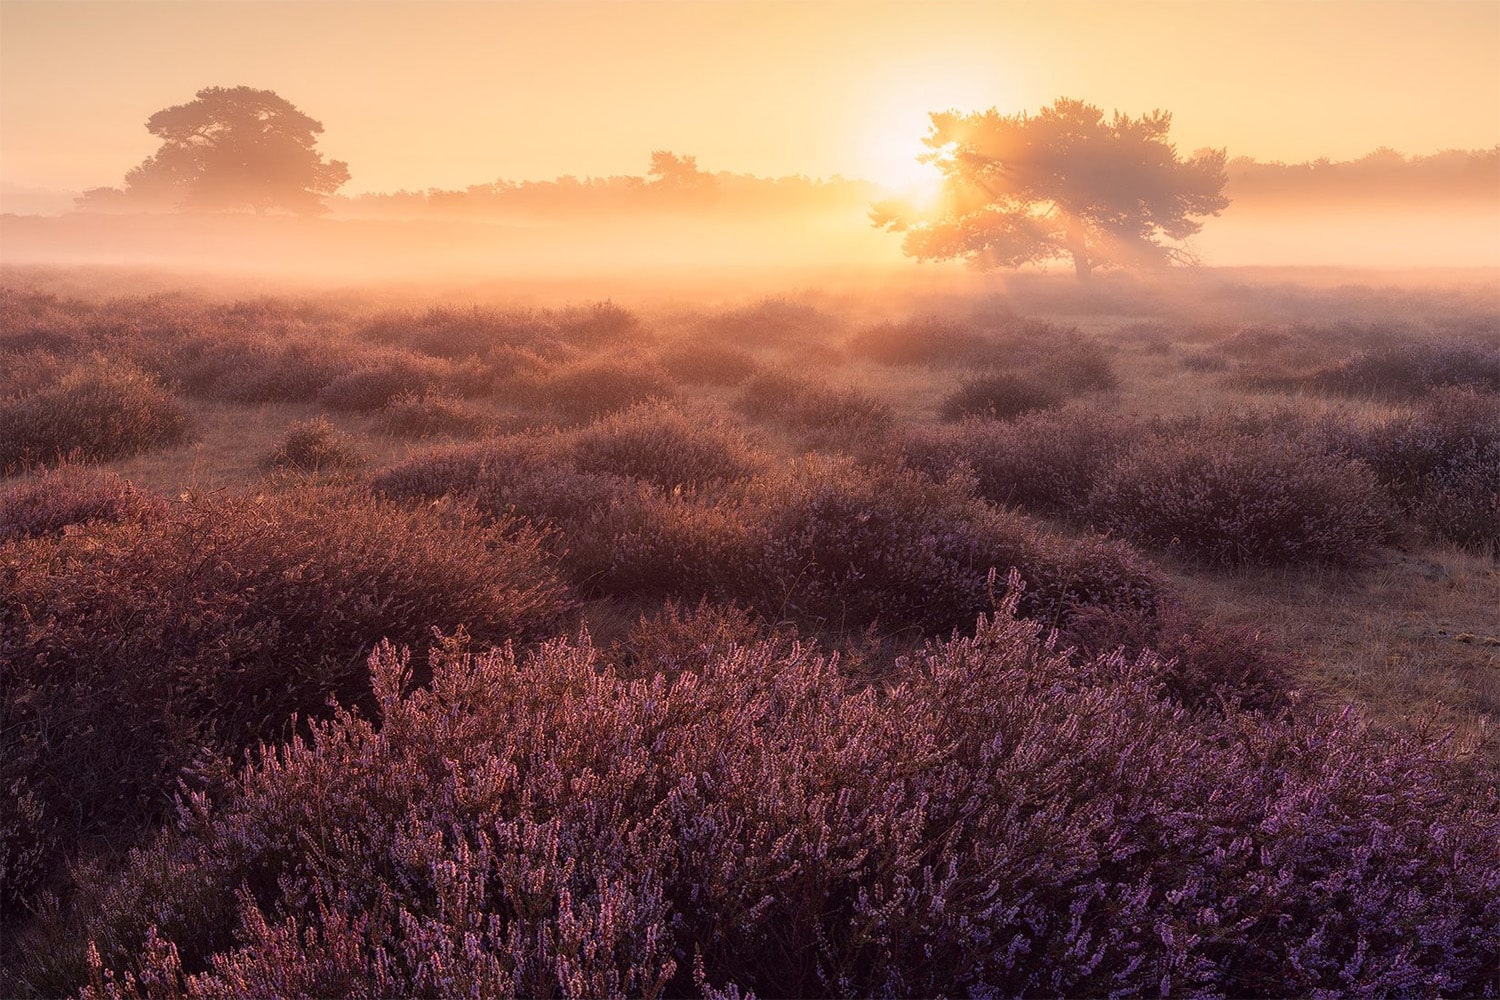 31 interesting facts about Heathlands